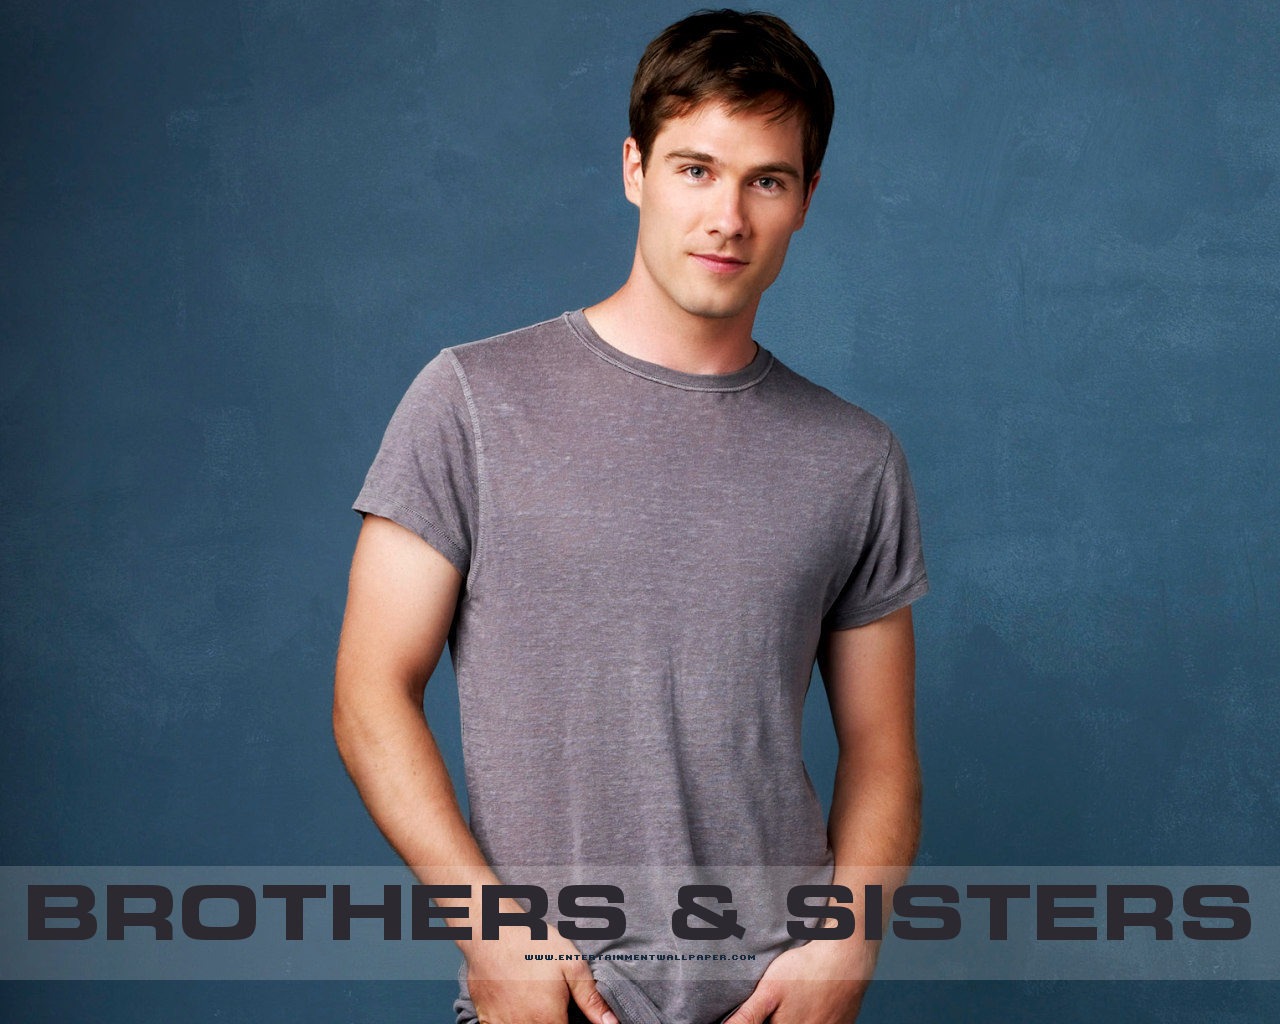 Brothers & Sisters 兄弟姐妹20 - 1280x1024